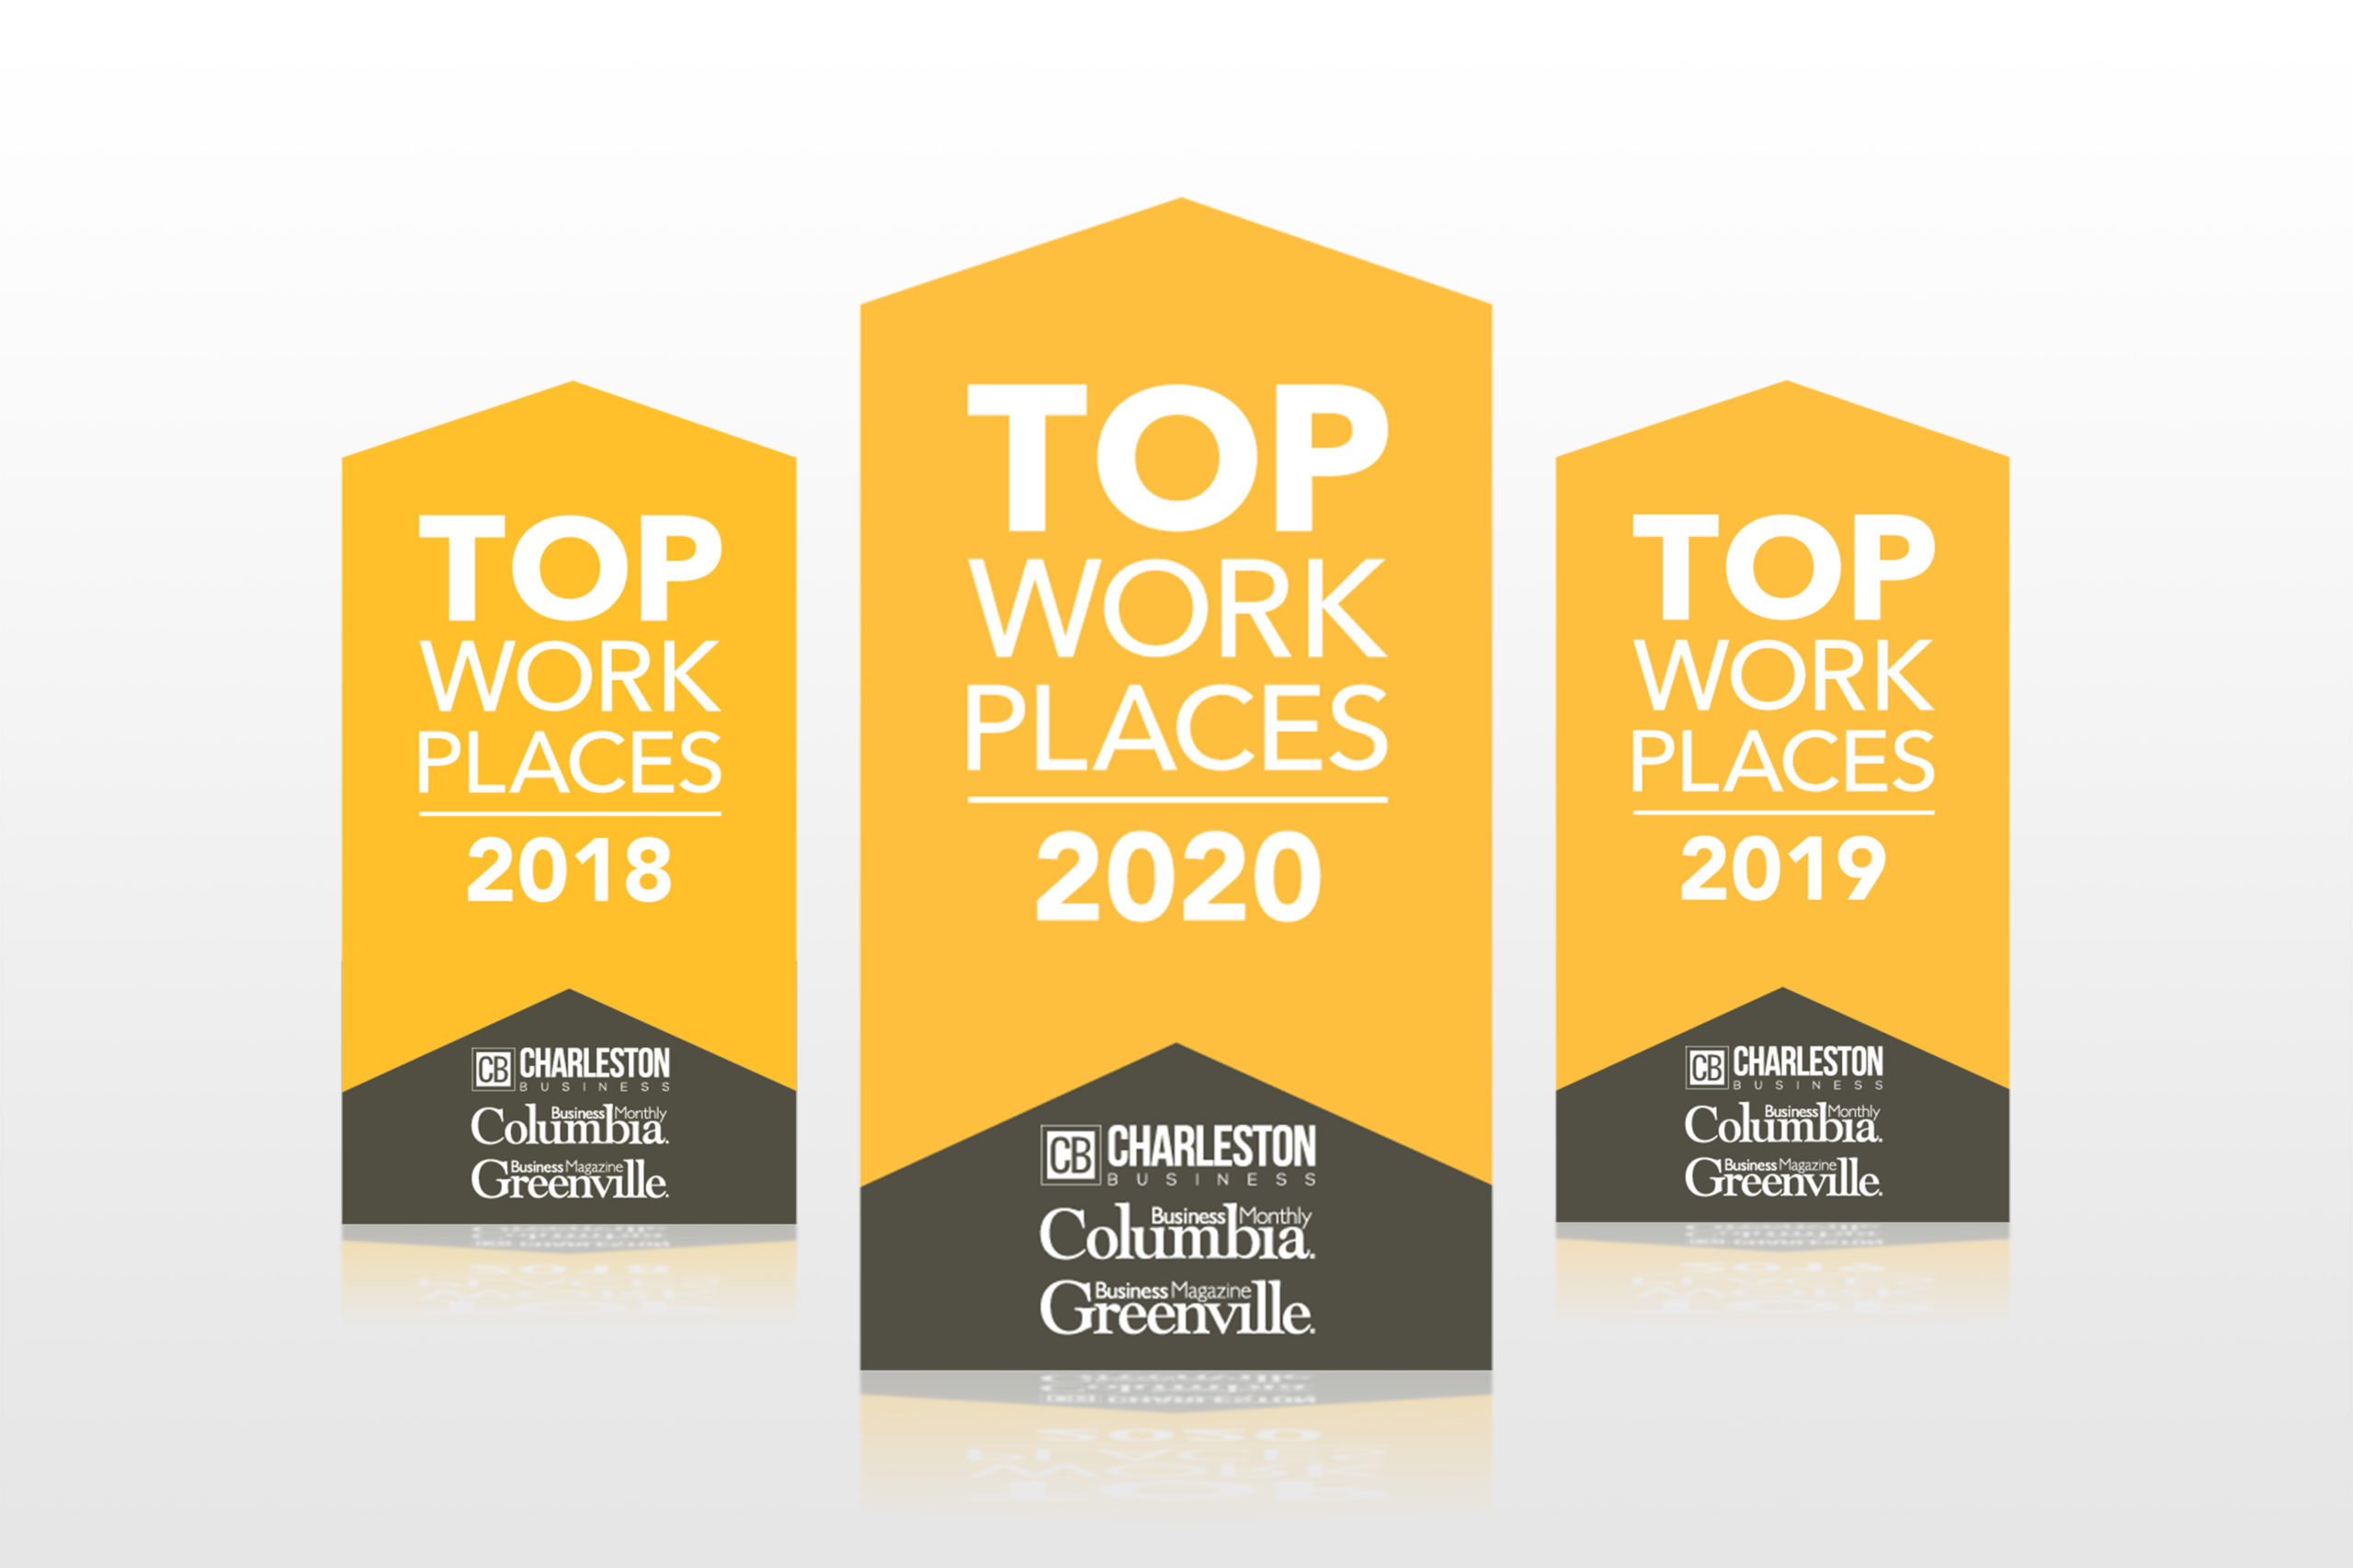 ThinkUp earning 2019's Top Work Places Award